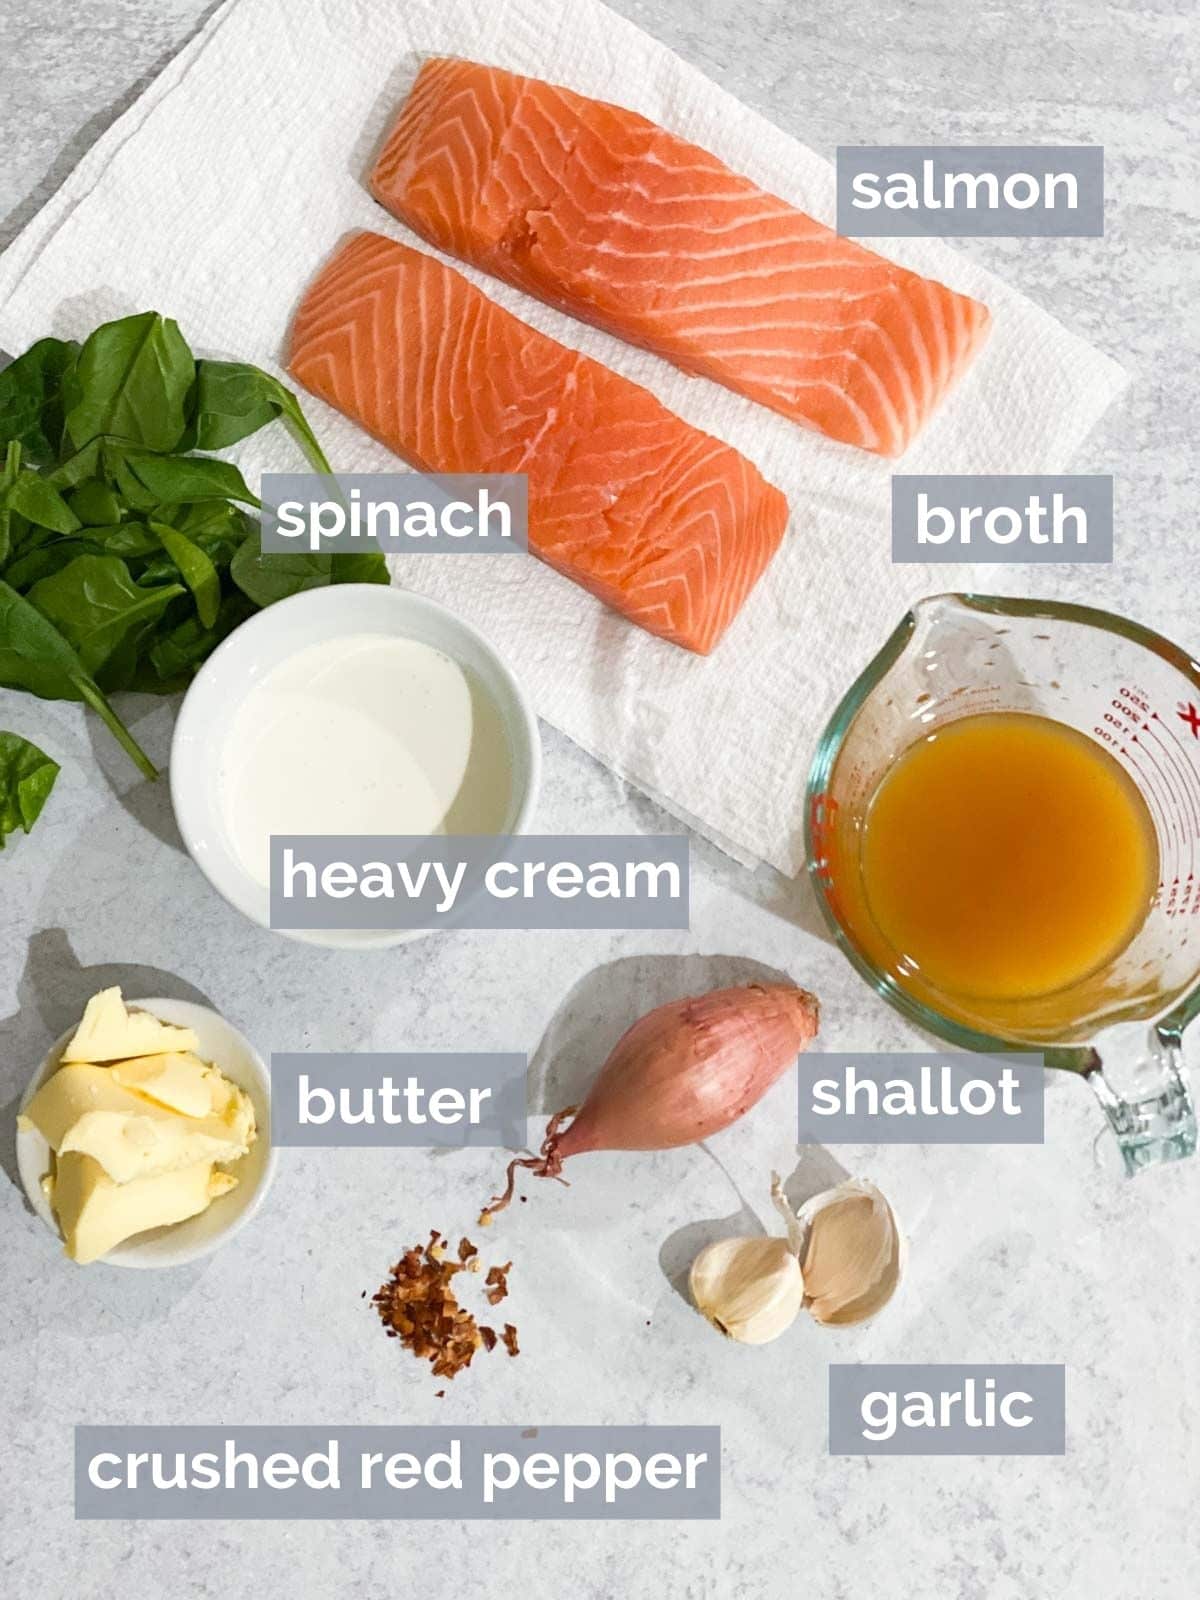 Salmon, spinach, broth, cream, butter, garlic, and shallot on a table